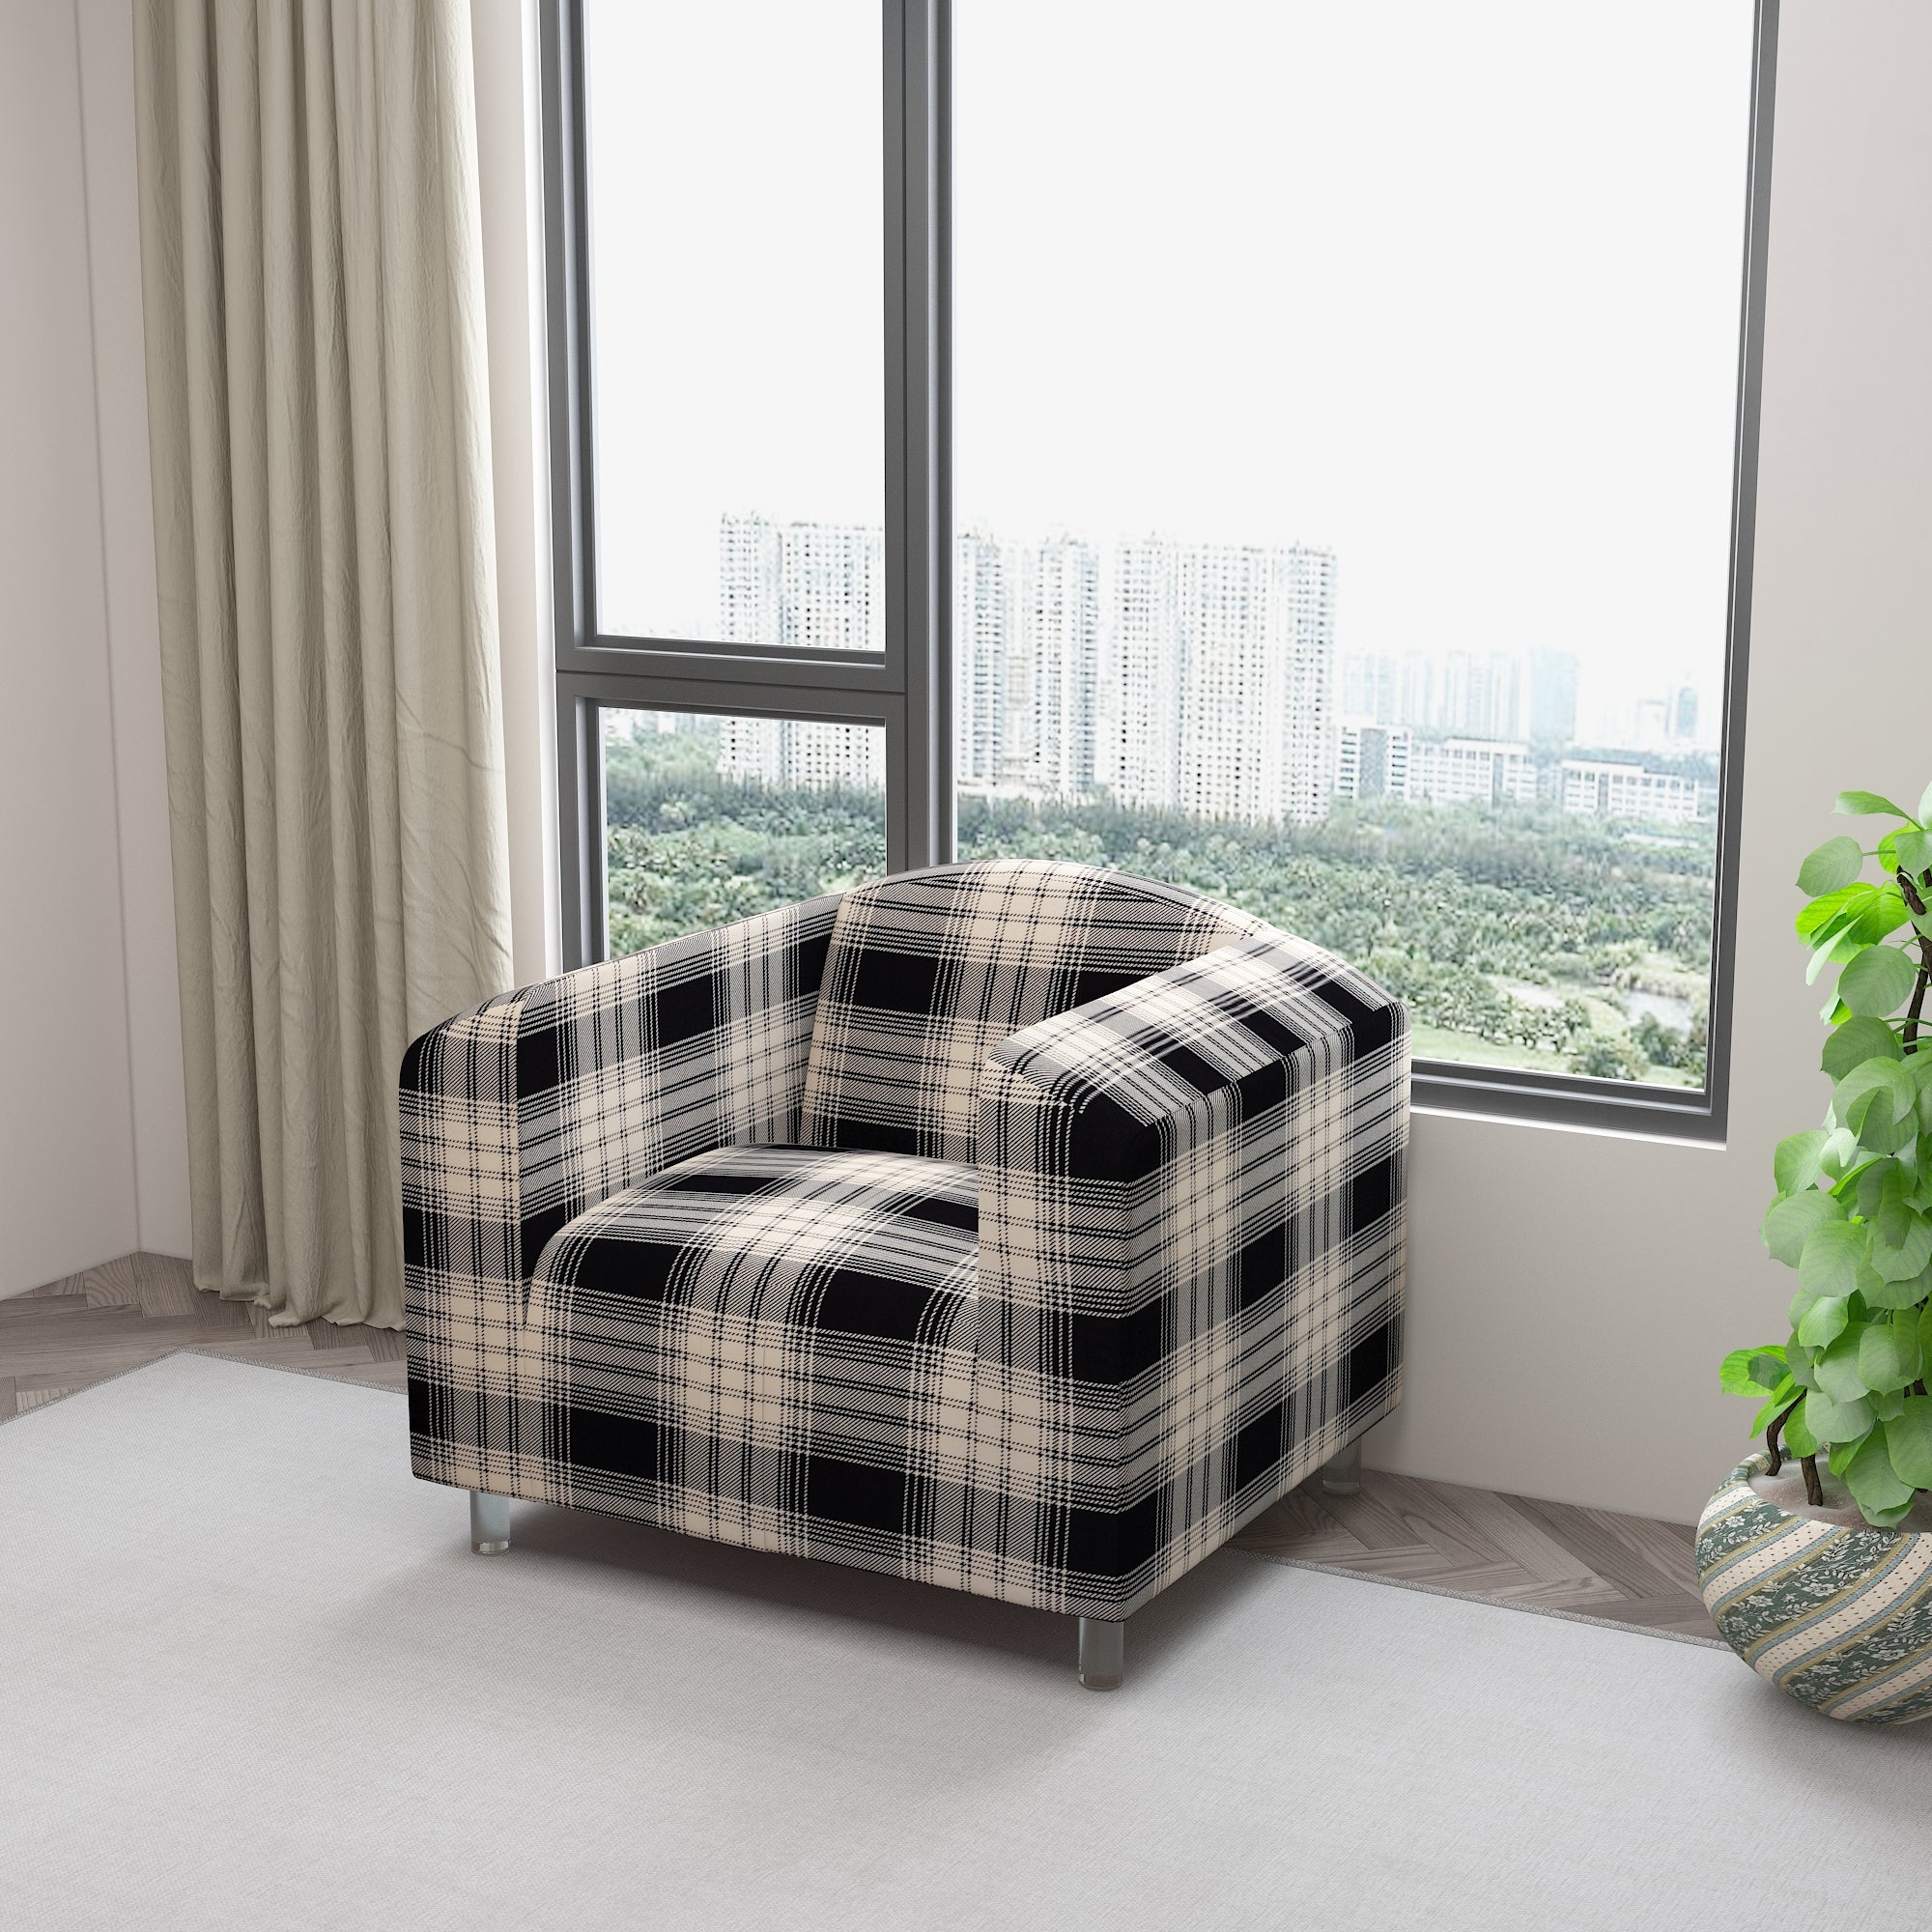 Waterproof Printed Sofa Protector Cover Full Stretchable, SP07 - Dream Care Furnishings Private Limited